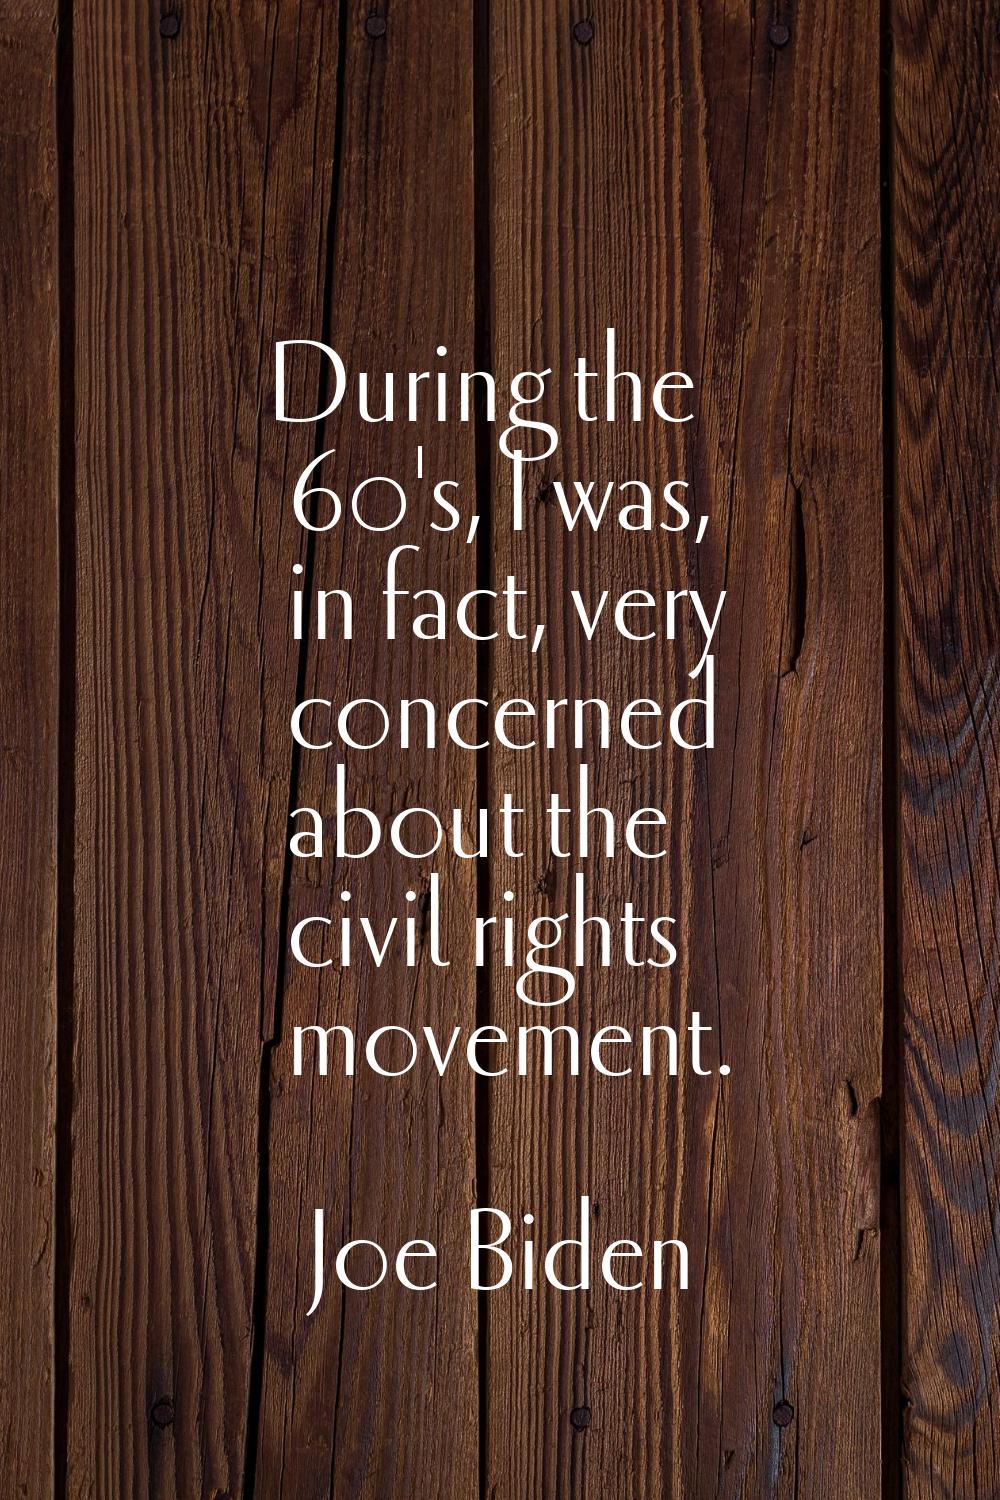 During the 60's, I was, in fact, very concerned about the civil rights movement.